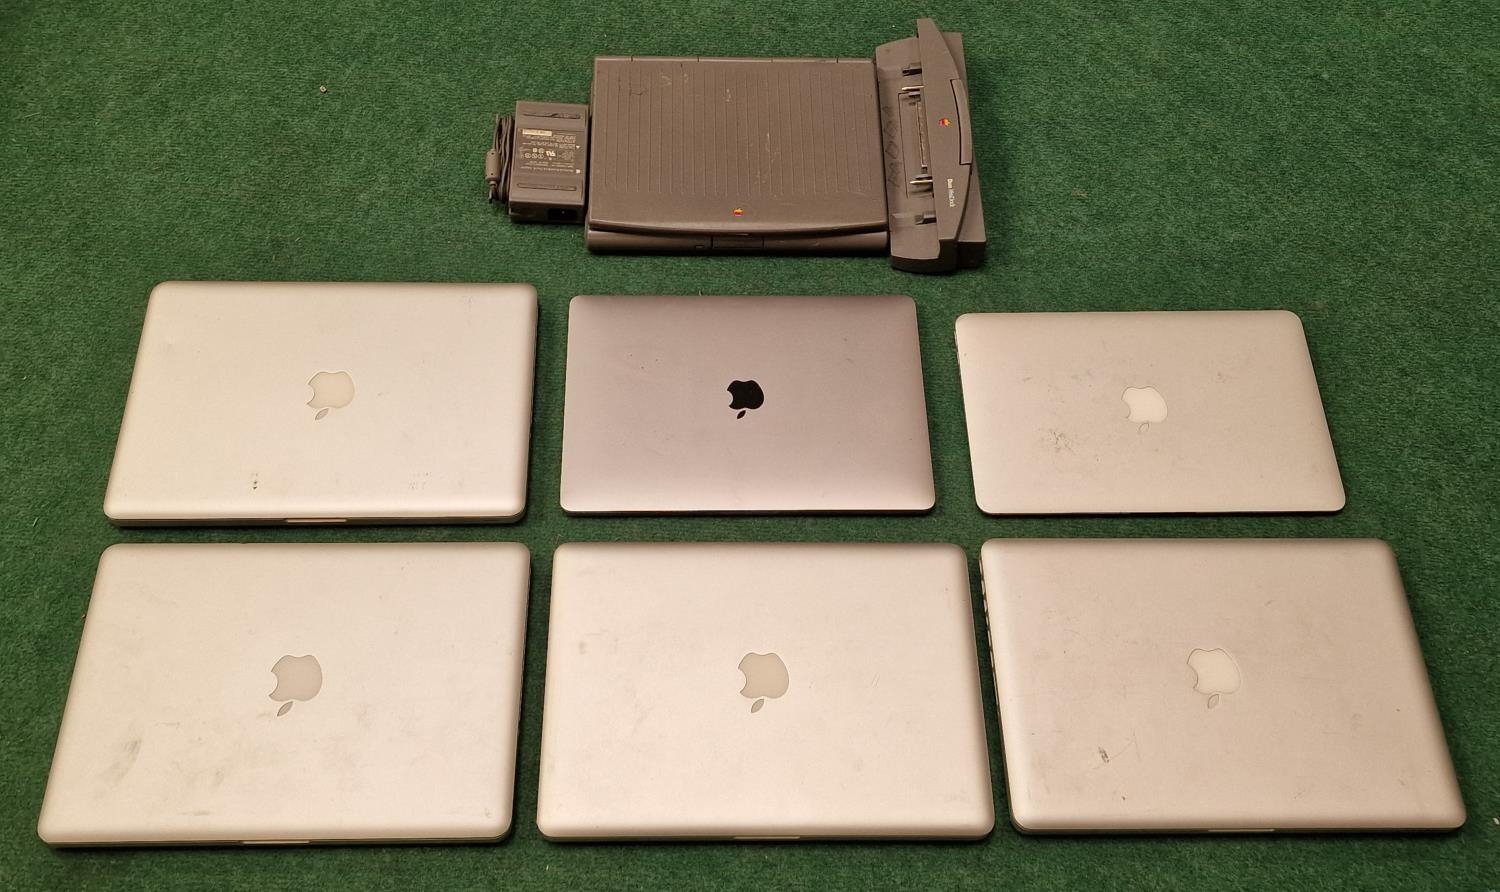 Selection of various laptops. These include - 4 x Apple A1278 - Apple A1465 - A1706 and a